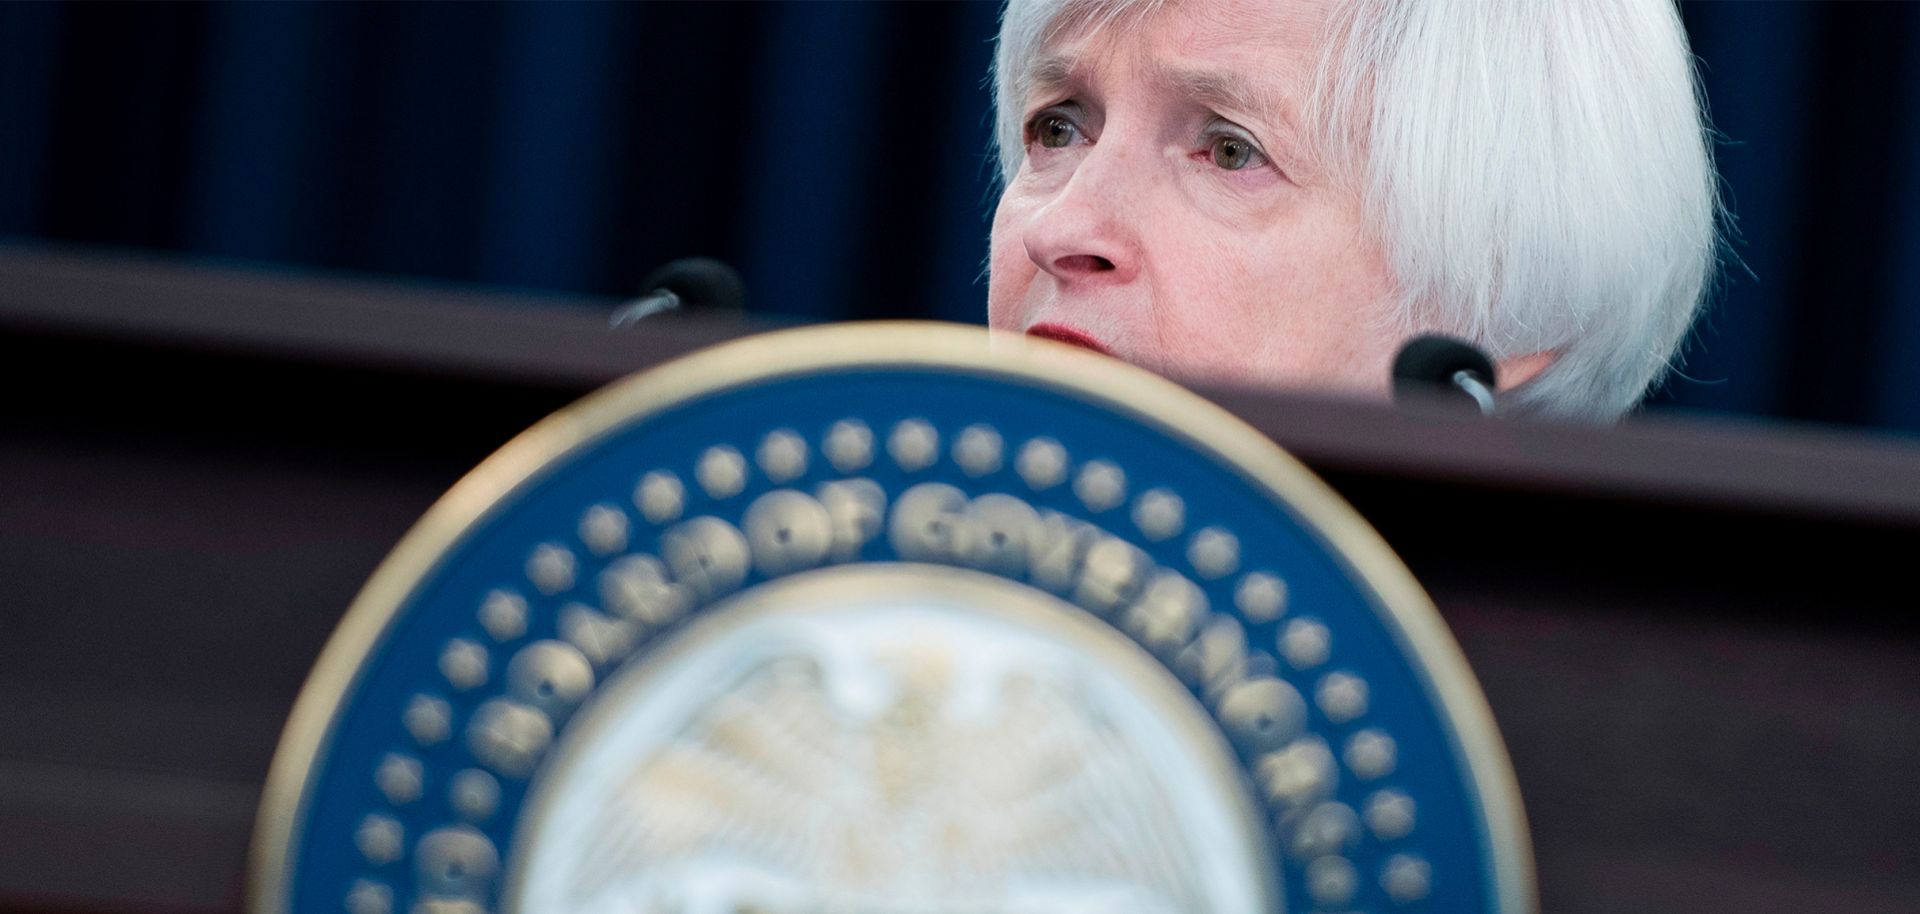 After Federal Reserve Board Chair Janet Yellen announced a hike in the U.S. benchmark lending rate March 15, the People's Bank of China bumped its rate up as well. But other major central banks declined to follow suit.